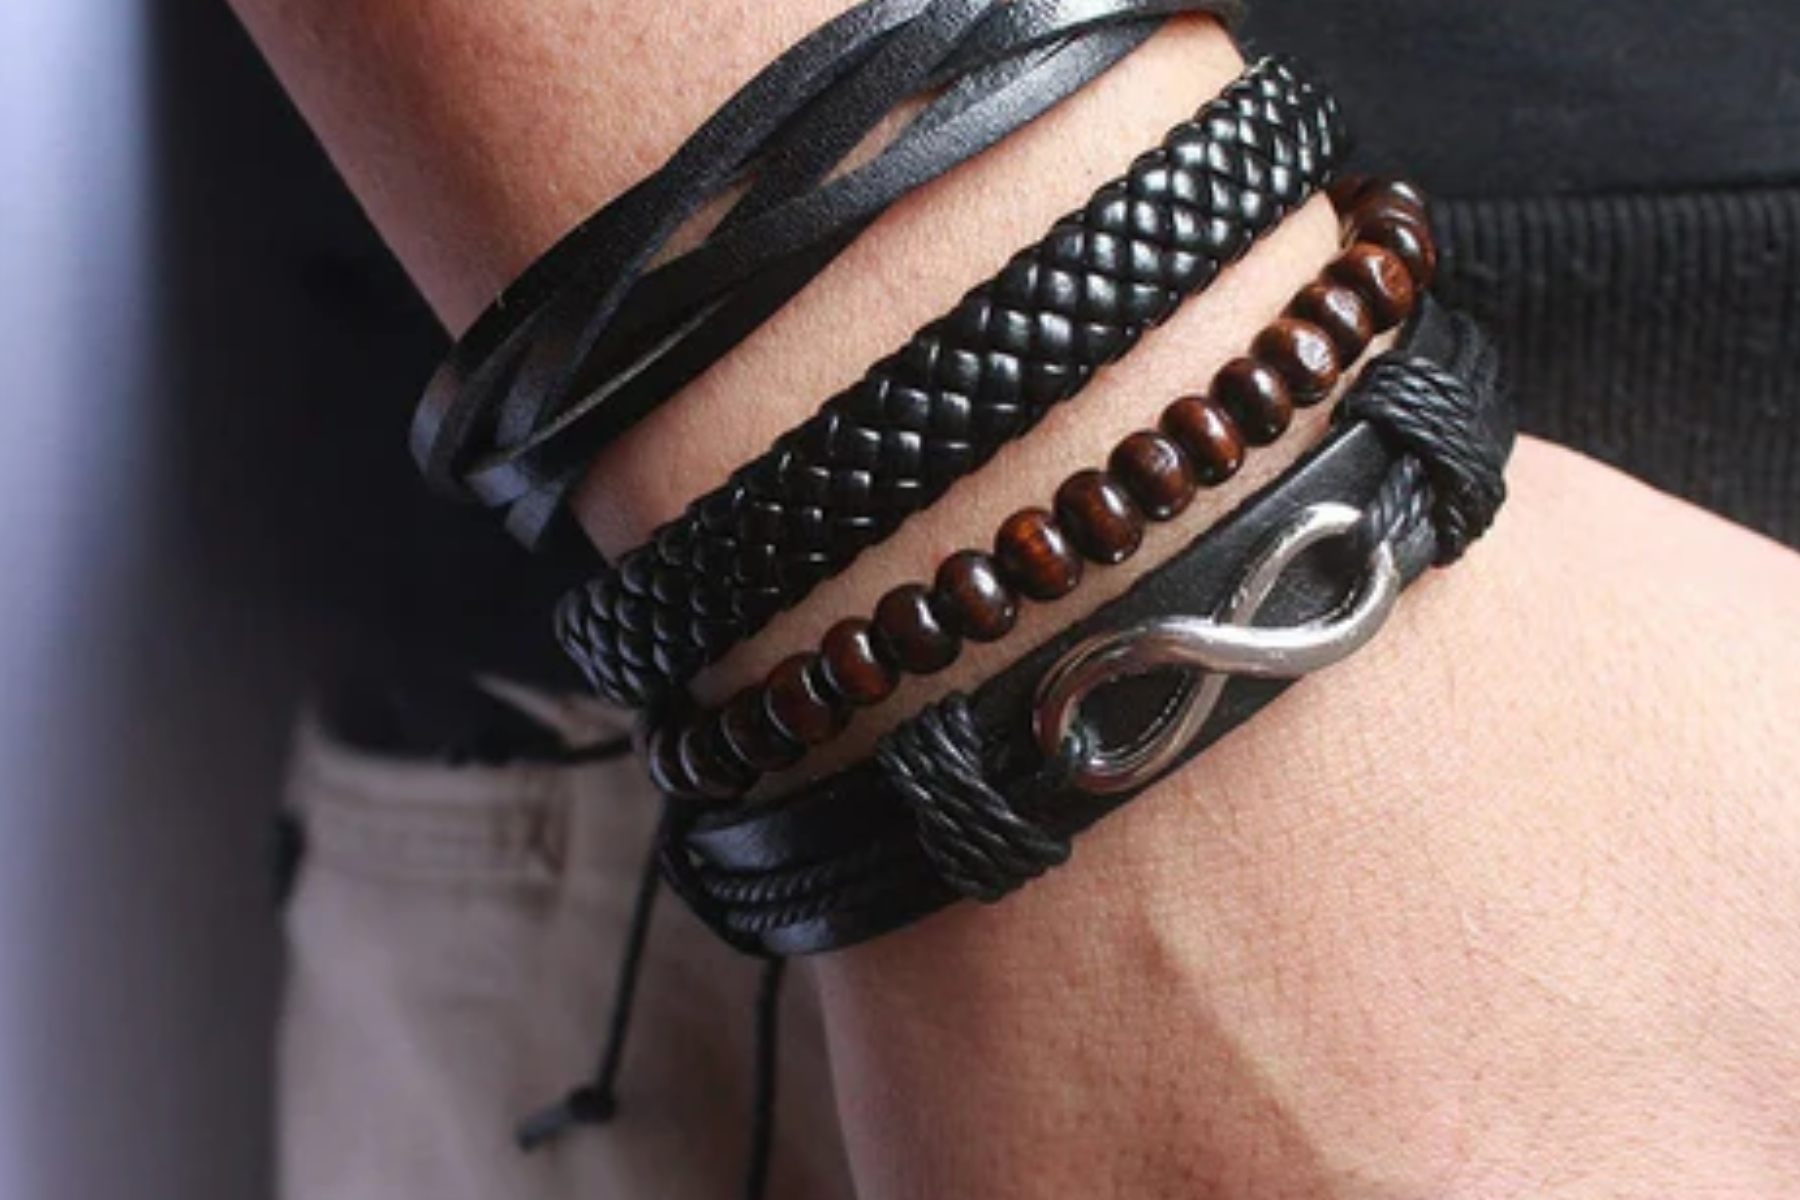 Leather Bracelets Jewelry - A High-Quality Material